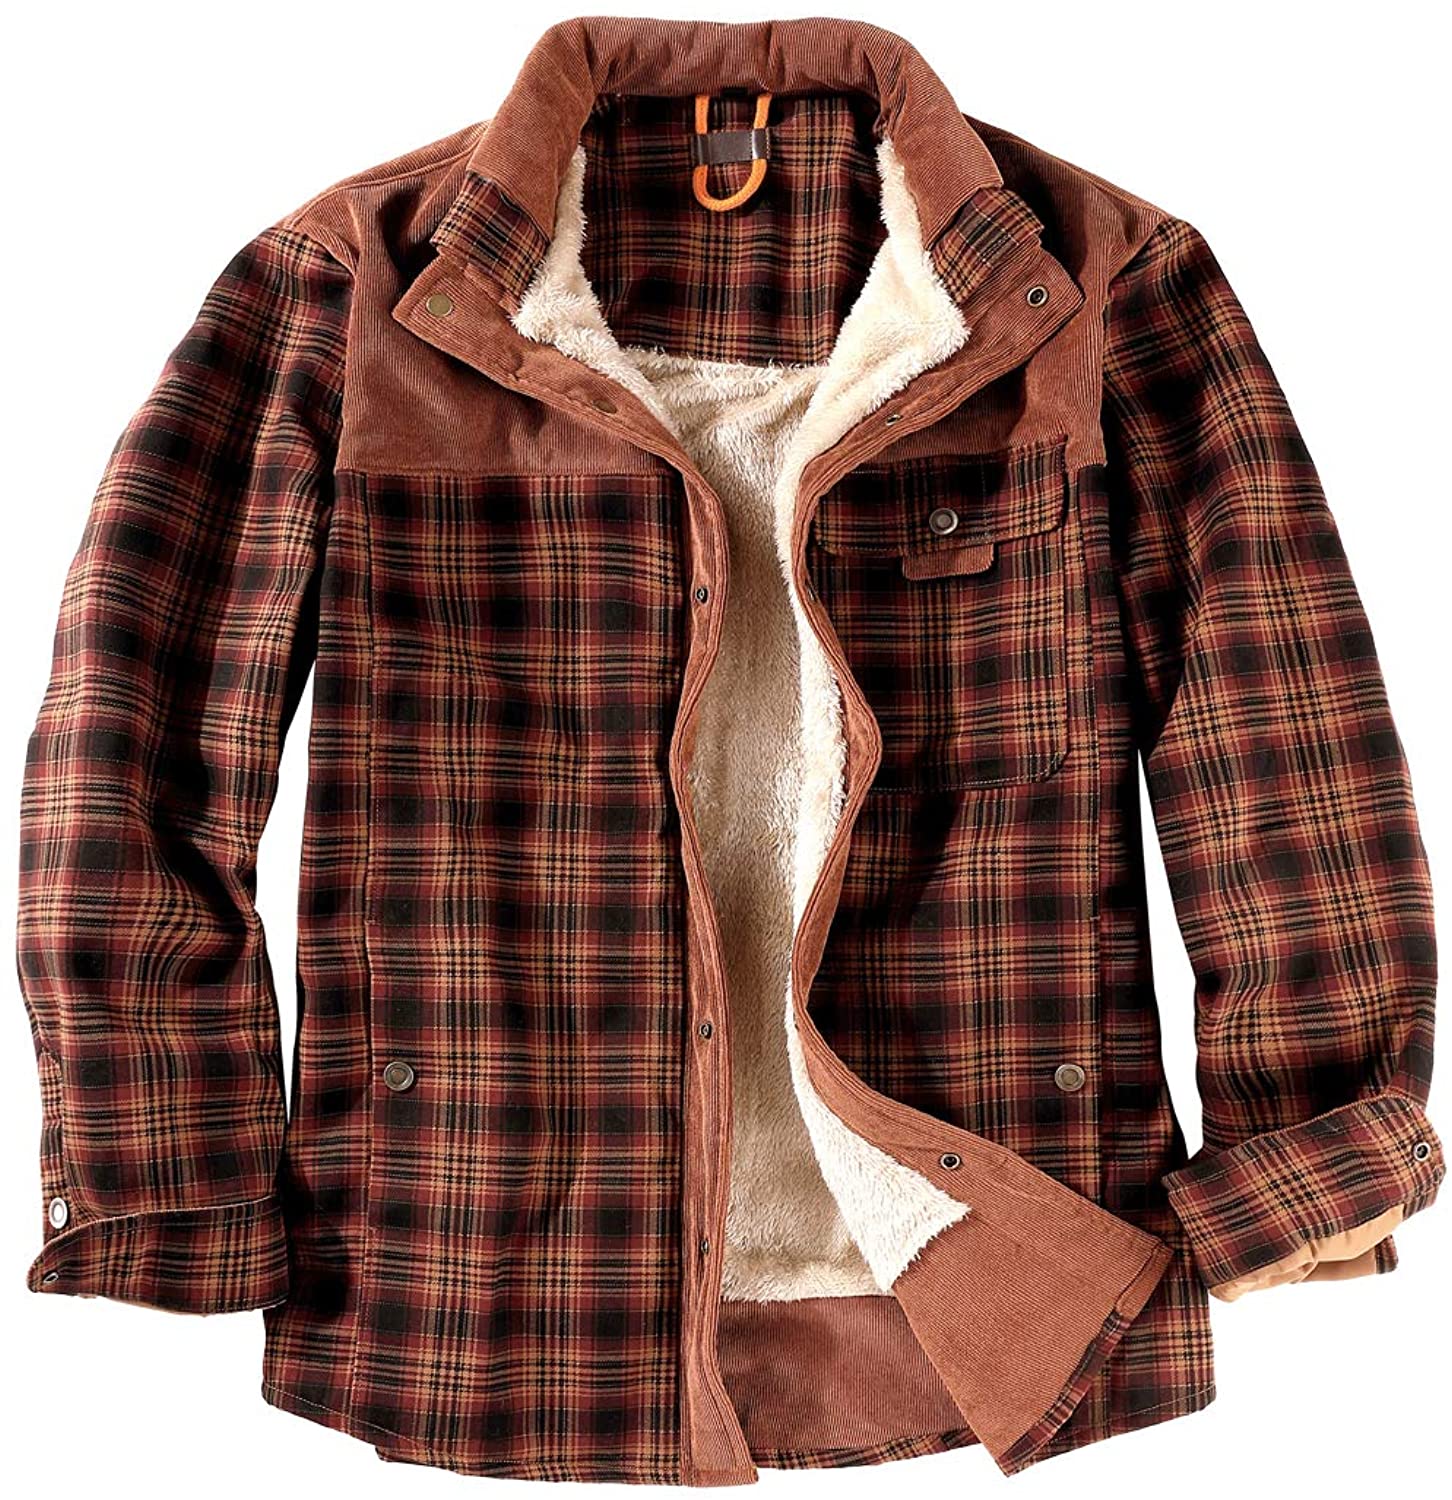 Mr.Stream Men's Outdoor Casual Vintage Long Sleeve Plaid Flannel Button Down Shirt Jacket 